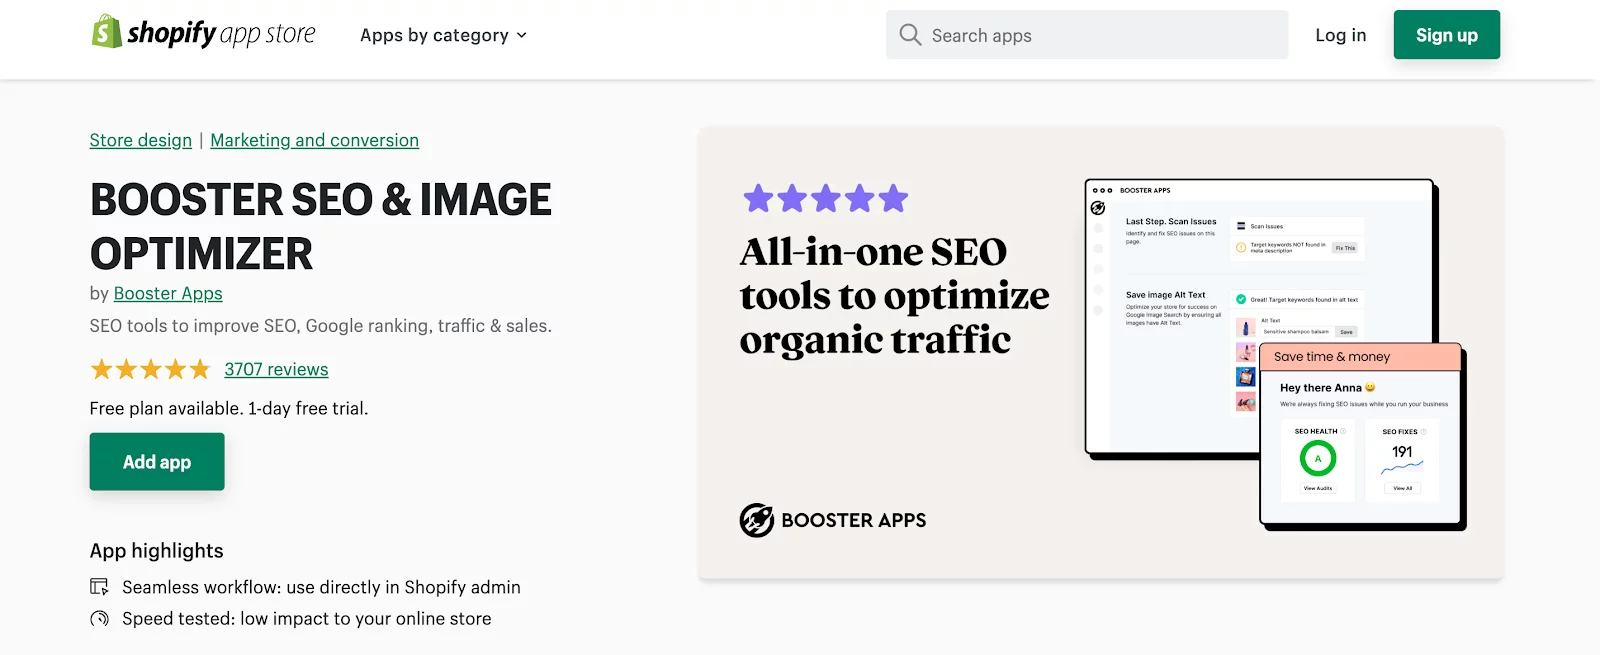 Shopify SEO Apps - Booster Seo and Image Optimizer